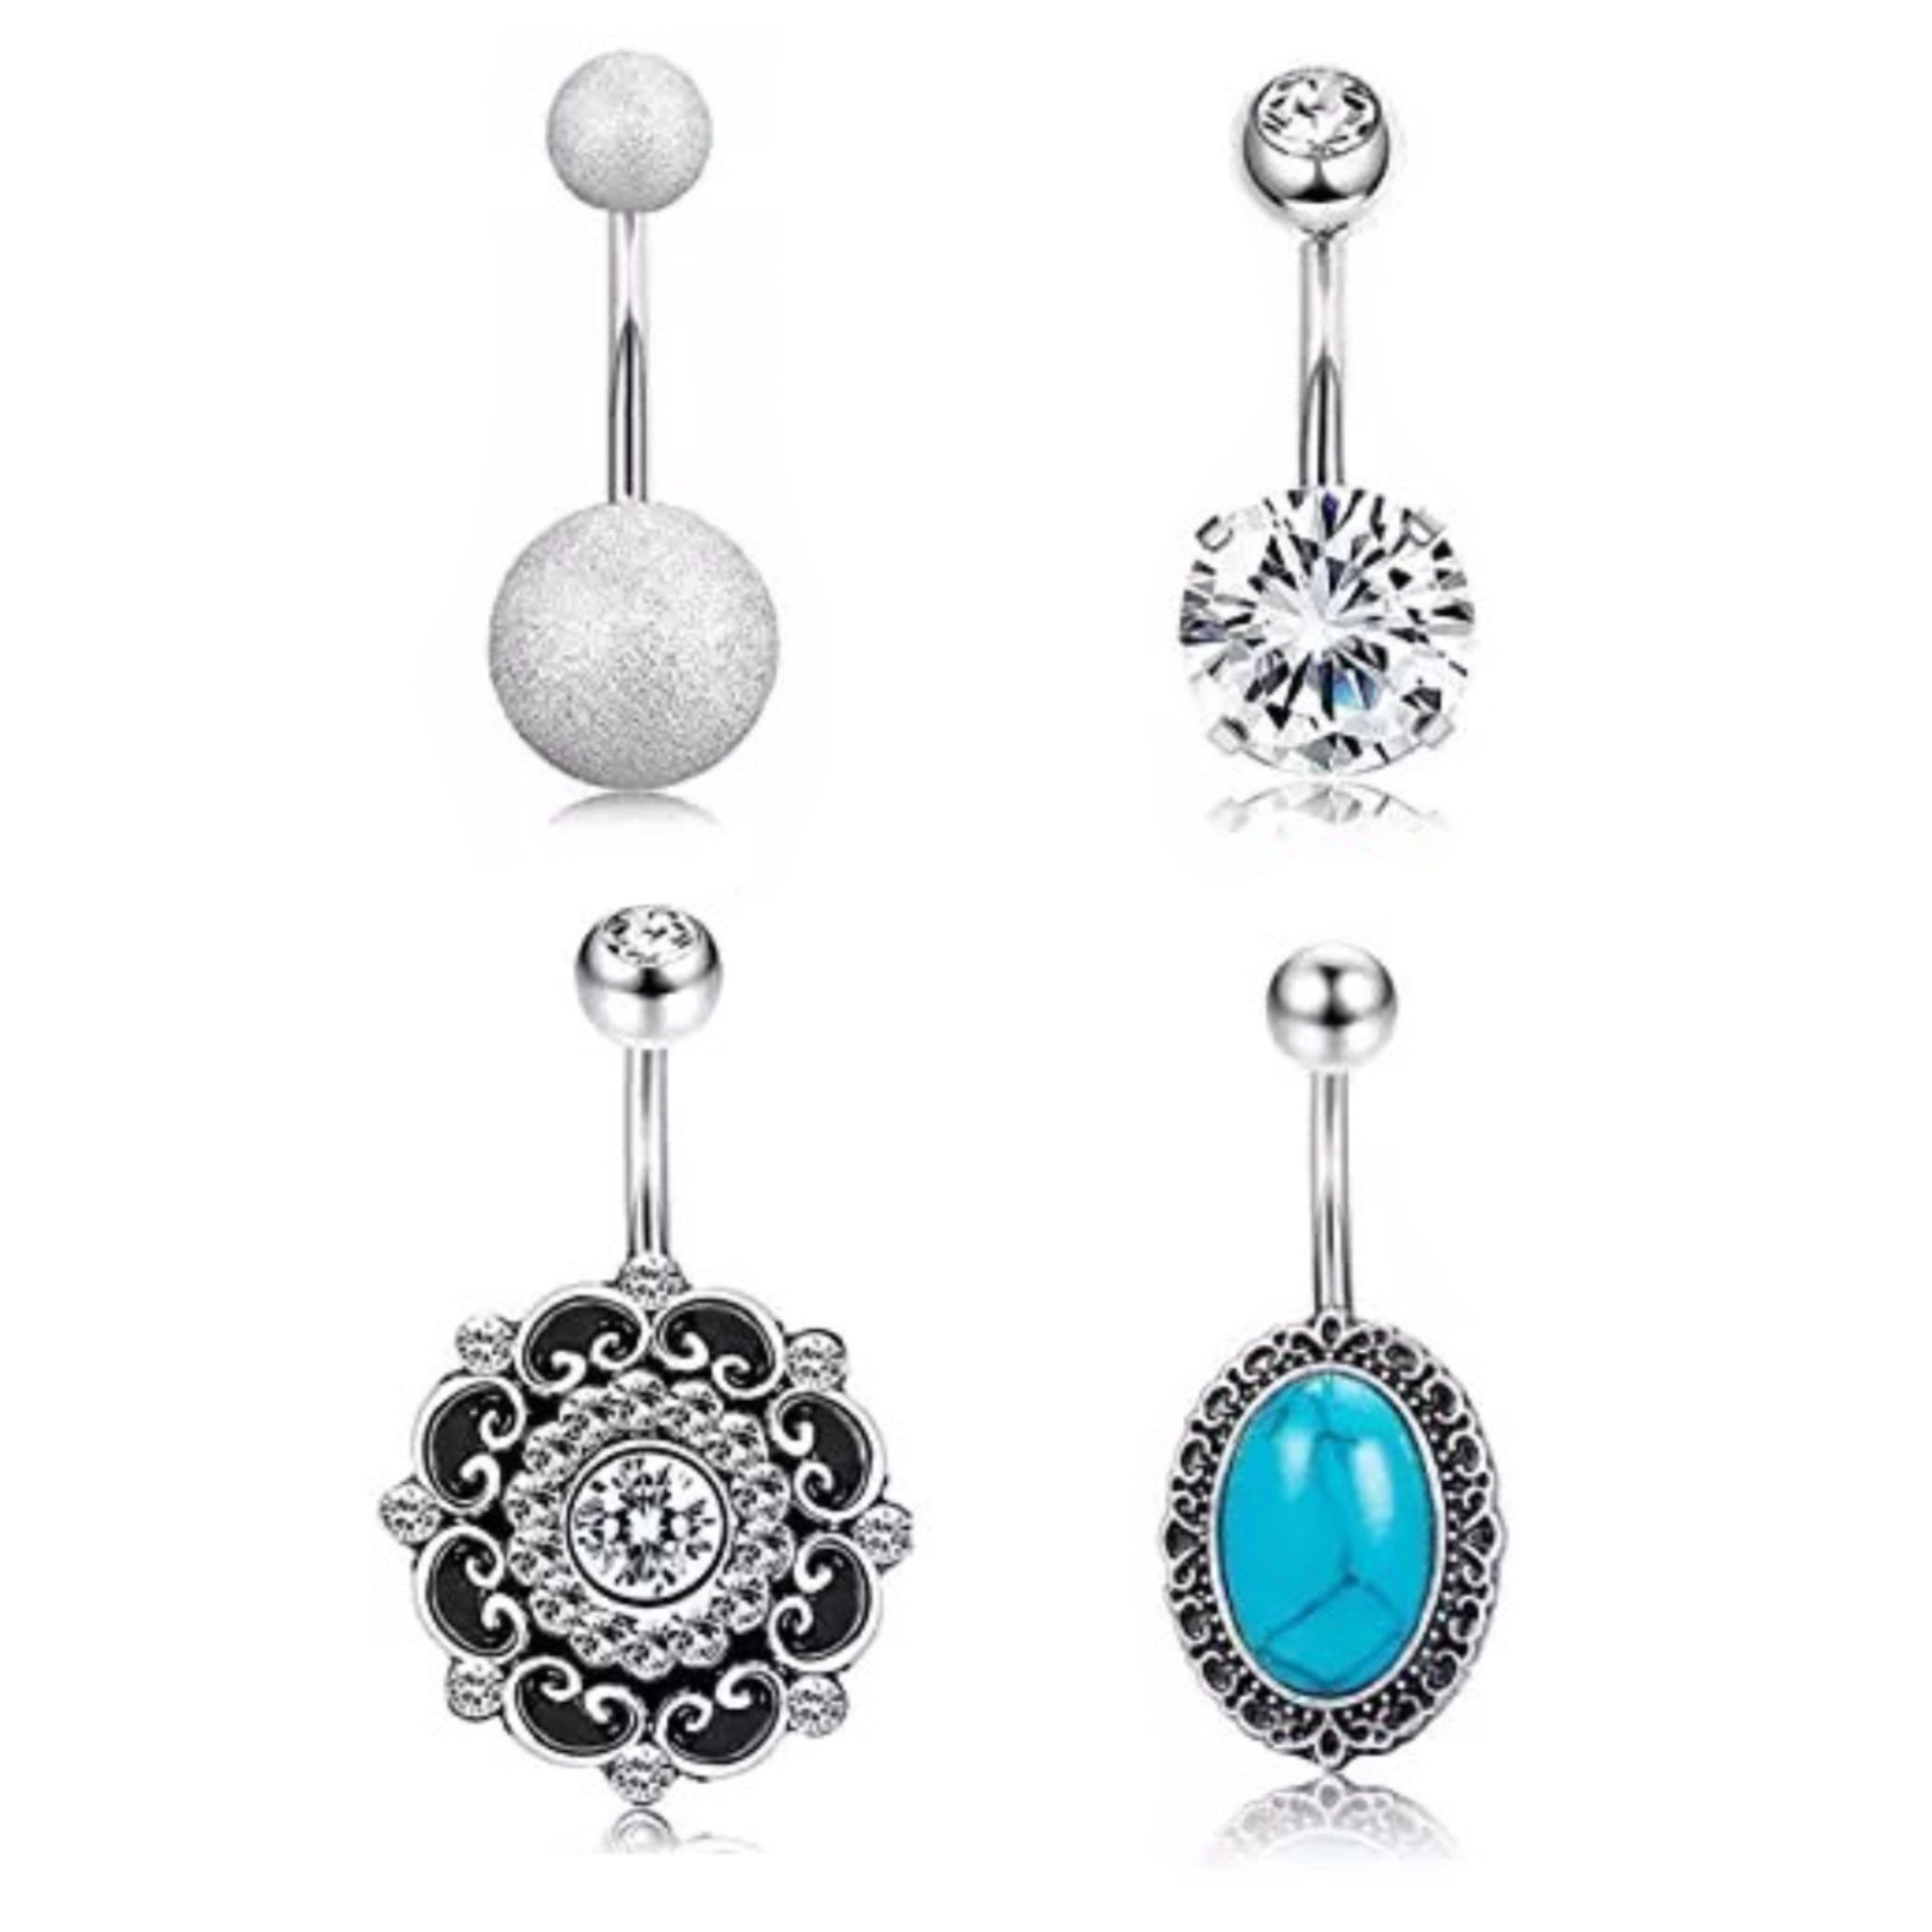 Set of 4 Belly button rings